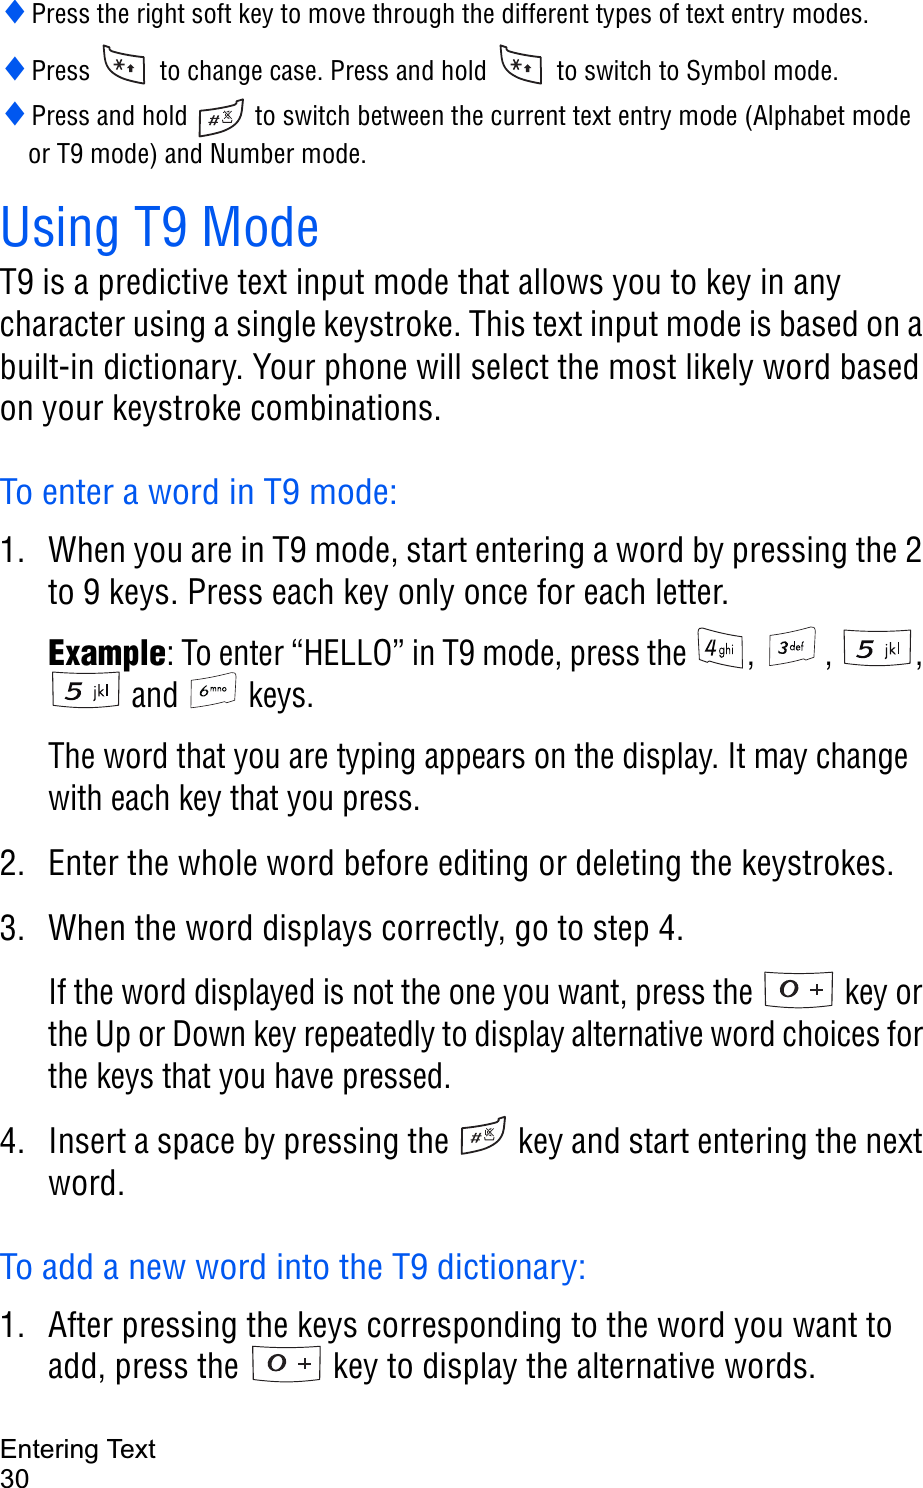 Entering Text30iPress the right soft key to move through the different types of text entry modes.iPress   to change case. Press and hold   to switch to Symbol mode.iPress and hold   to switch between the current text entry mode (Alphabet mode or T9 mode) and Number mode.Using T9 ModeT9 is a predictive text input mode that allows you to key in any character using a single keystroke. This text input mode is based on a built-in dictionary. Your phone will select the most likely word based on your keystroke combinations.To enter a word in T9 mode:1. When you are in T9 mode, start entering a word by pressing the 2 to 9 keys. Press each key only once for each letter. Example: To enter “HELLO” in T9 mode, press the  ,  ,  ,  and   keys.The word that you are typing appears on the display. It may change with each key that you press.2. Enter the whole word before editing or deleting the keystrokes.3. When the word displays correctly, go to step 4. If the word displayed is not the one you want, press the   key or the Up or Down key repeatedly to display alternative word choices for the keys that you have pressed. 4. Insert a space by pressing the   key and start entering the next word.To add a new word into the T9 dictionary:1. After pressing the keys corresponding to the word you want to add, press the   key to display the alternative words.